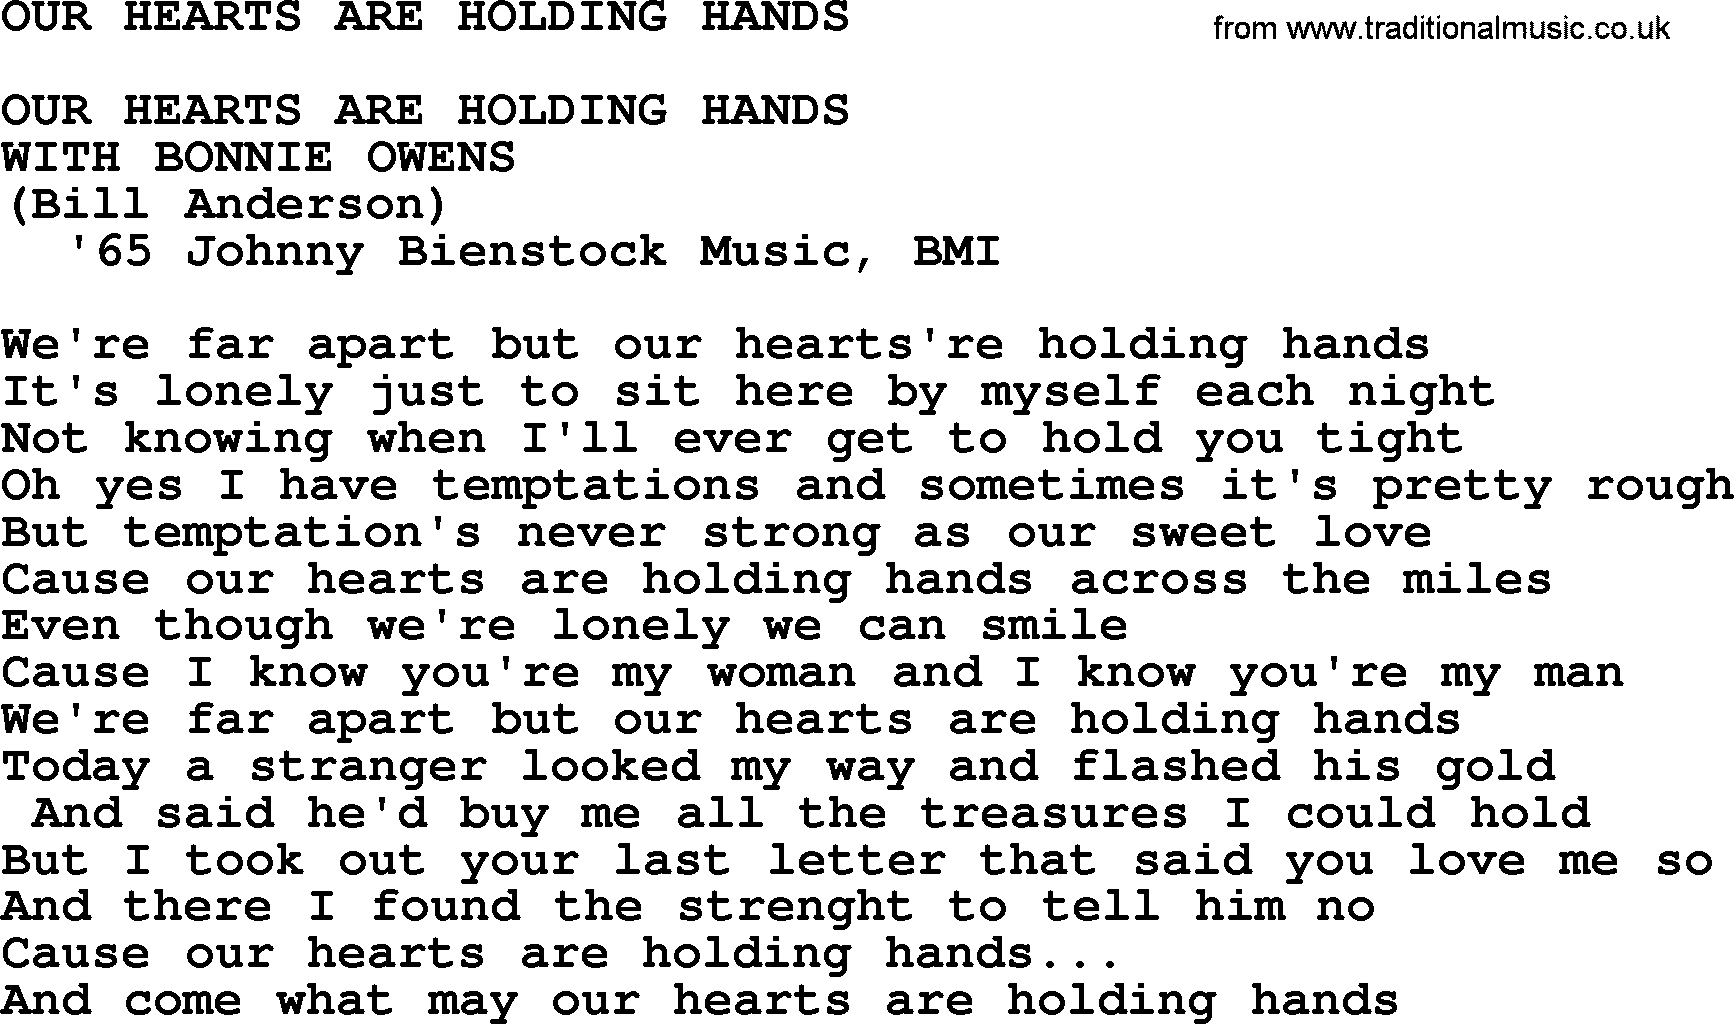 Merle Haggard song: Our Hearts Are Holding Hands, lyrics.